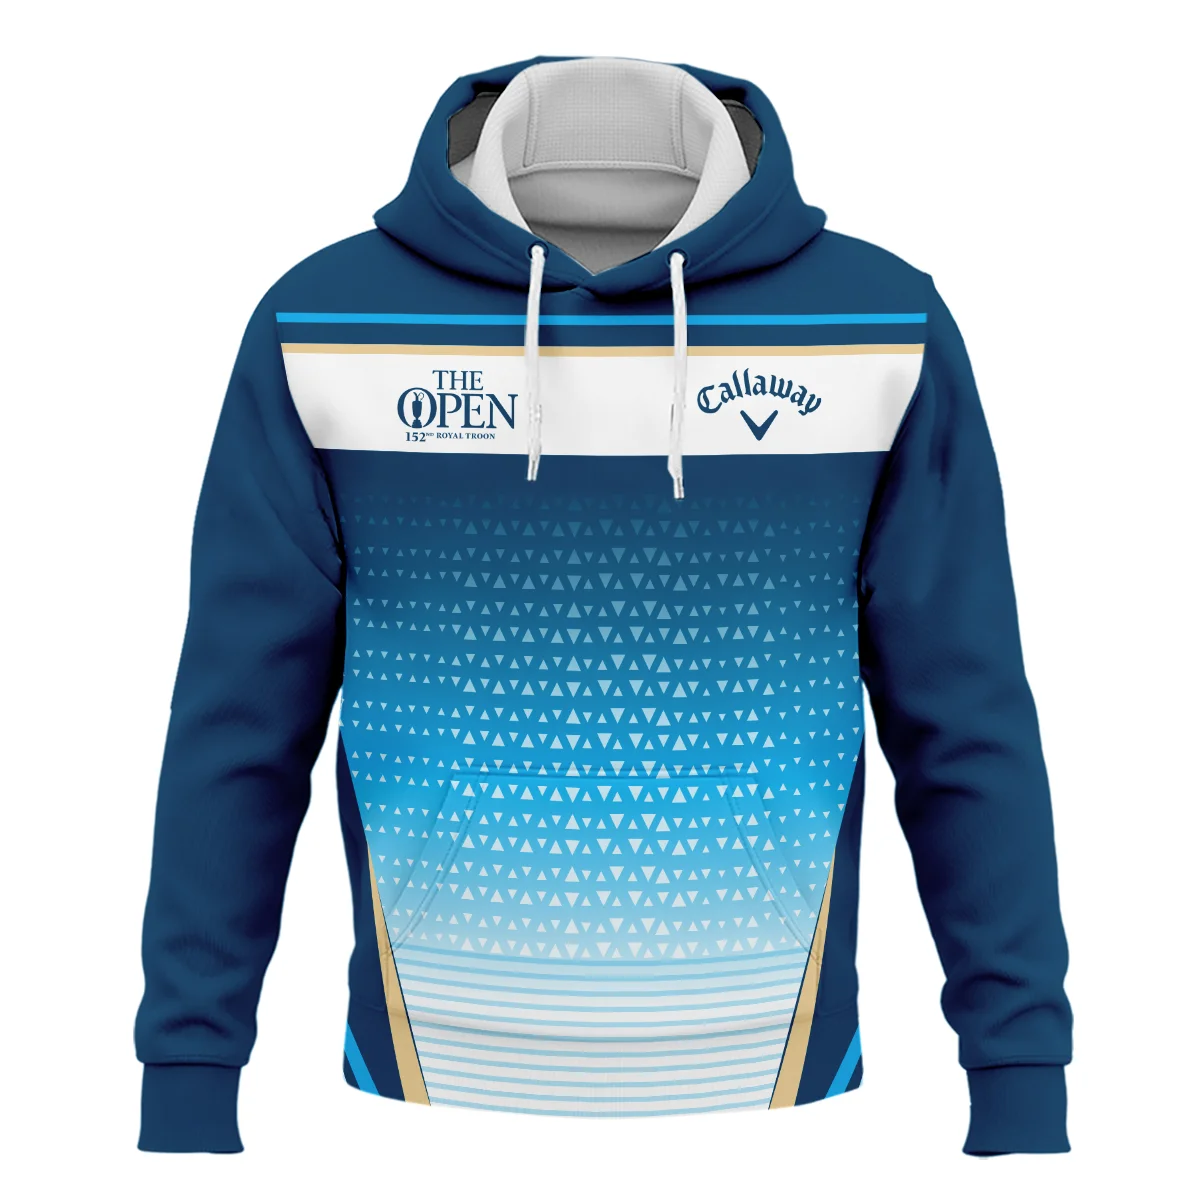 152nd The Open Championship Golf Blue Yellow White Pattern Background Callaway Zipper Hoodie Shirt All Over Prints HOTOP250624A01CLWZHD